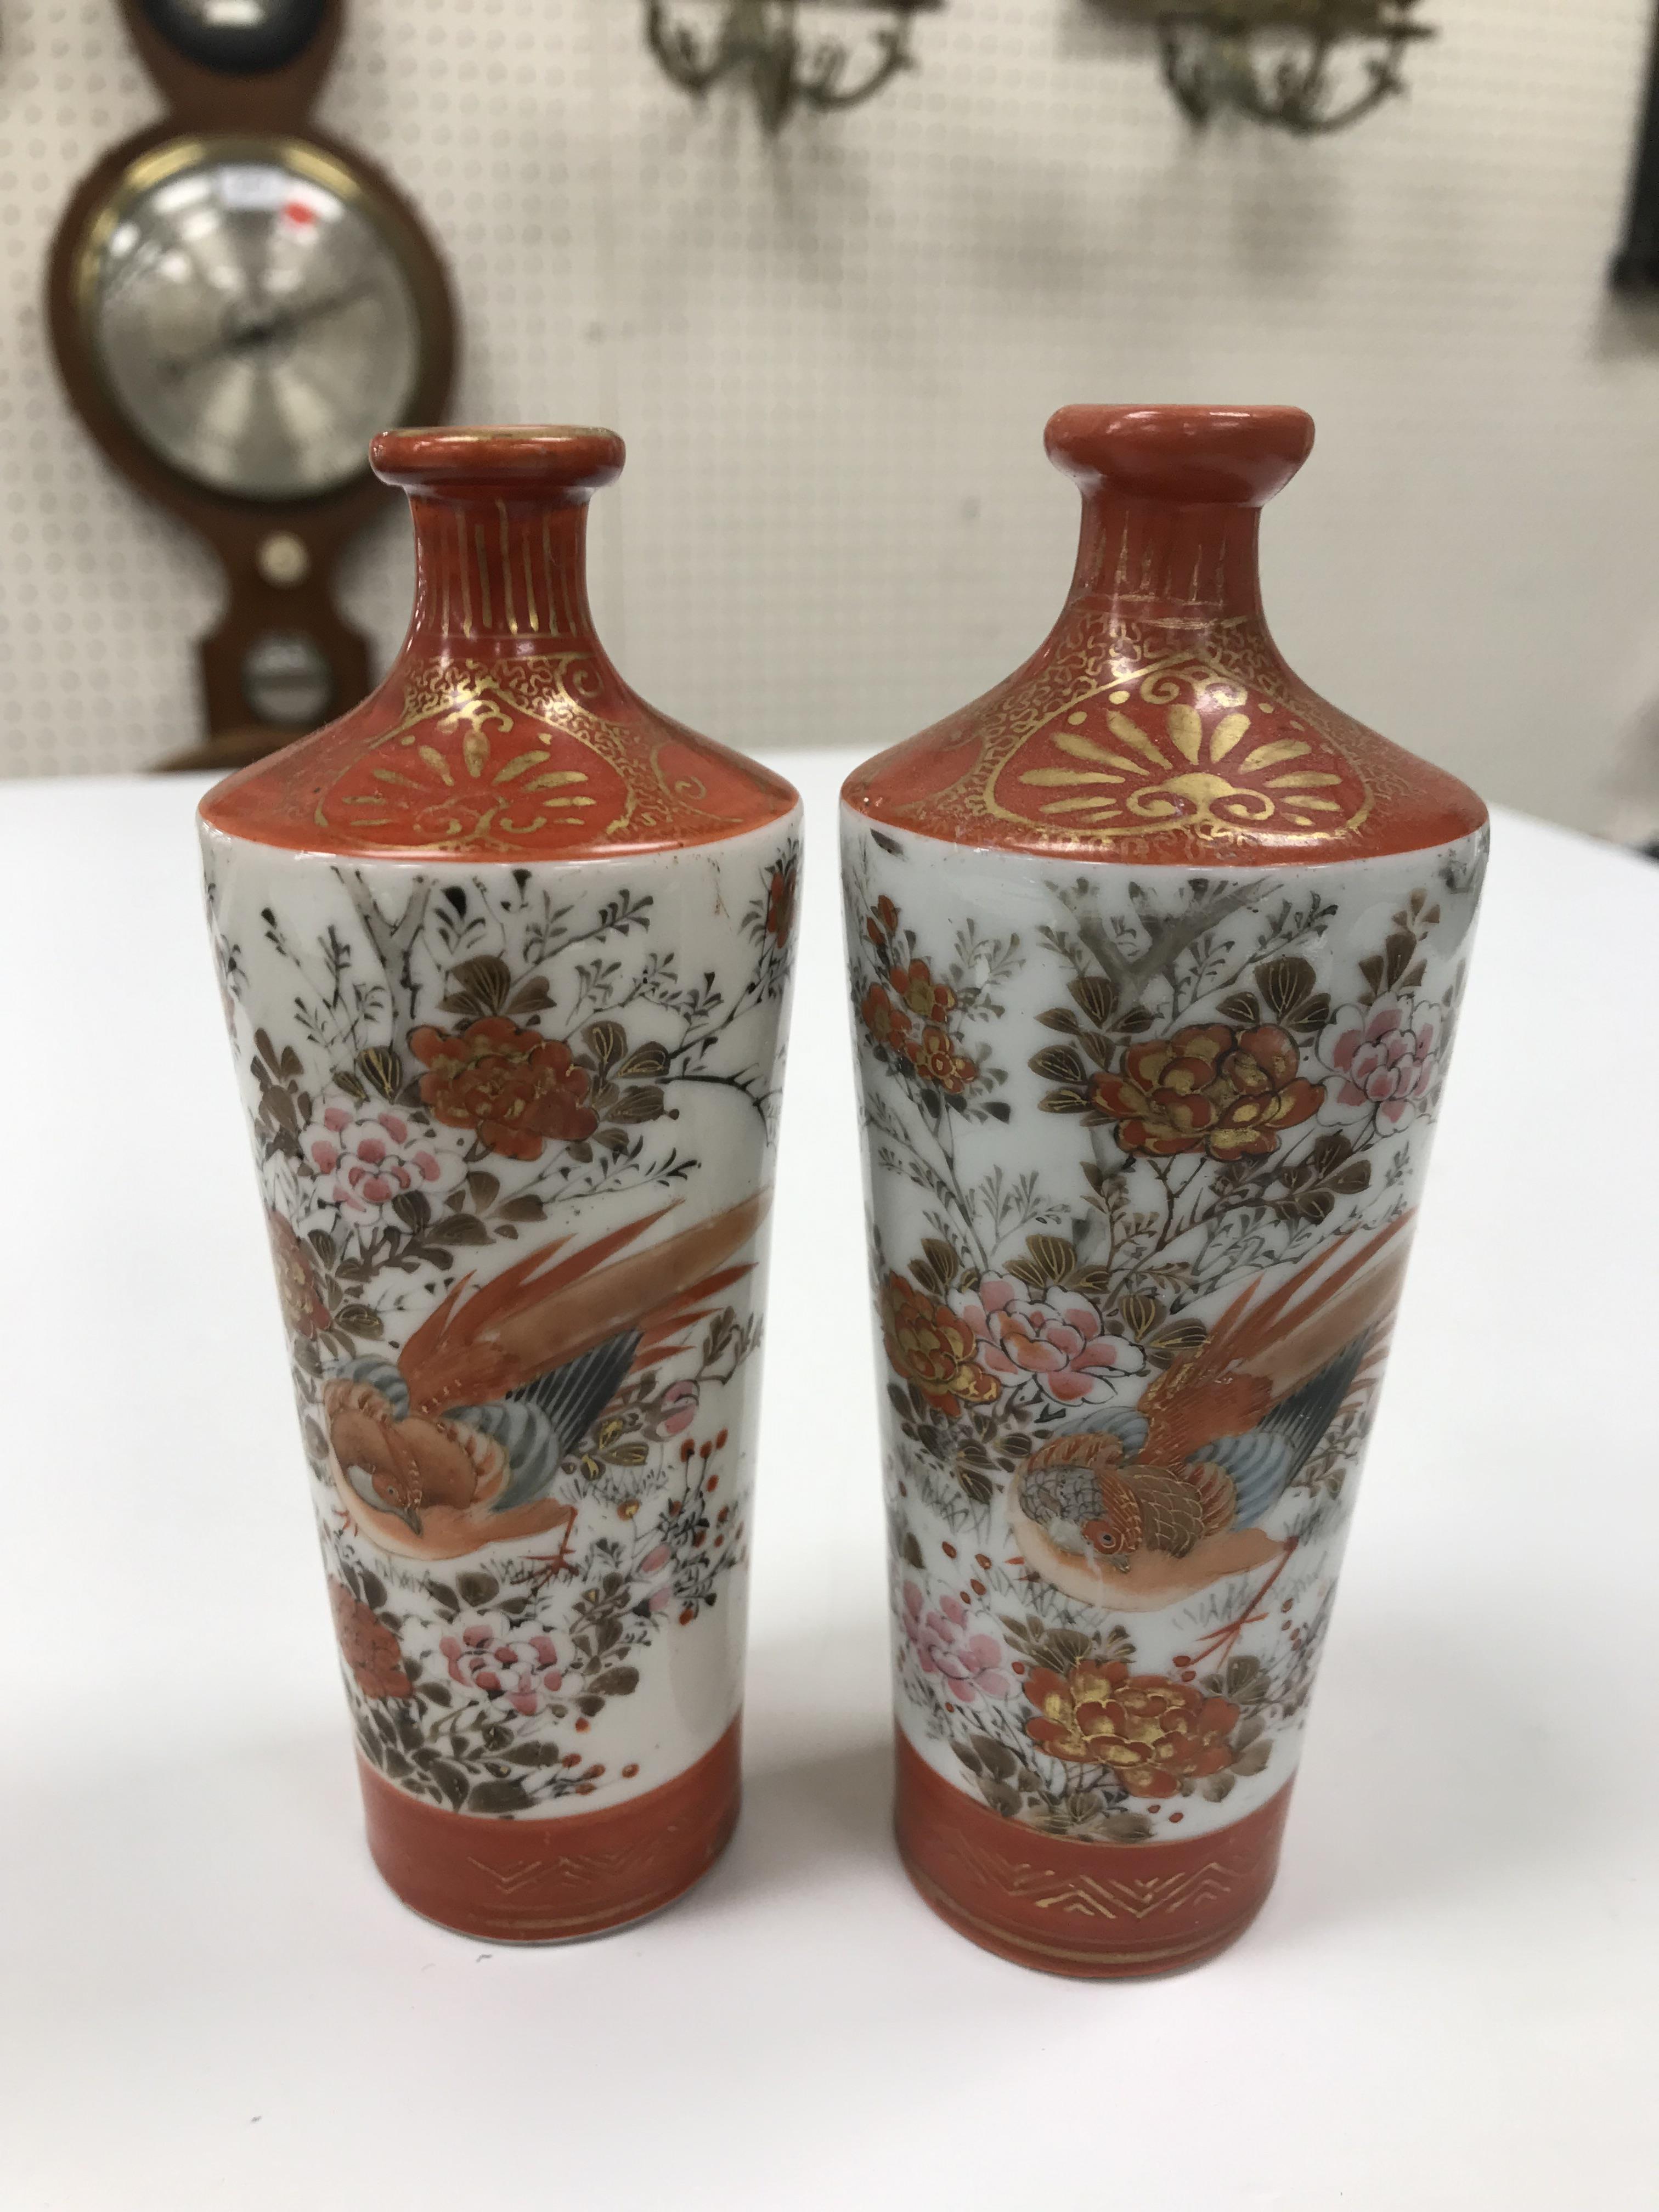 A collection of Japanese Meiji period Kutani ware vases including a moon flask shaped vase with - Image 28 of 152